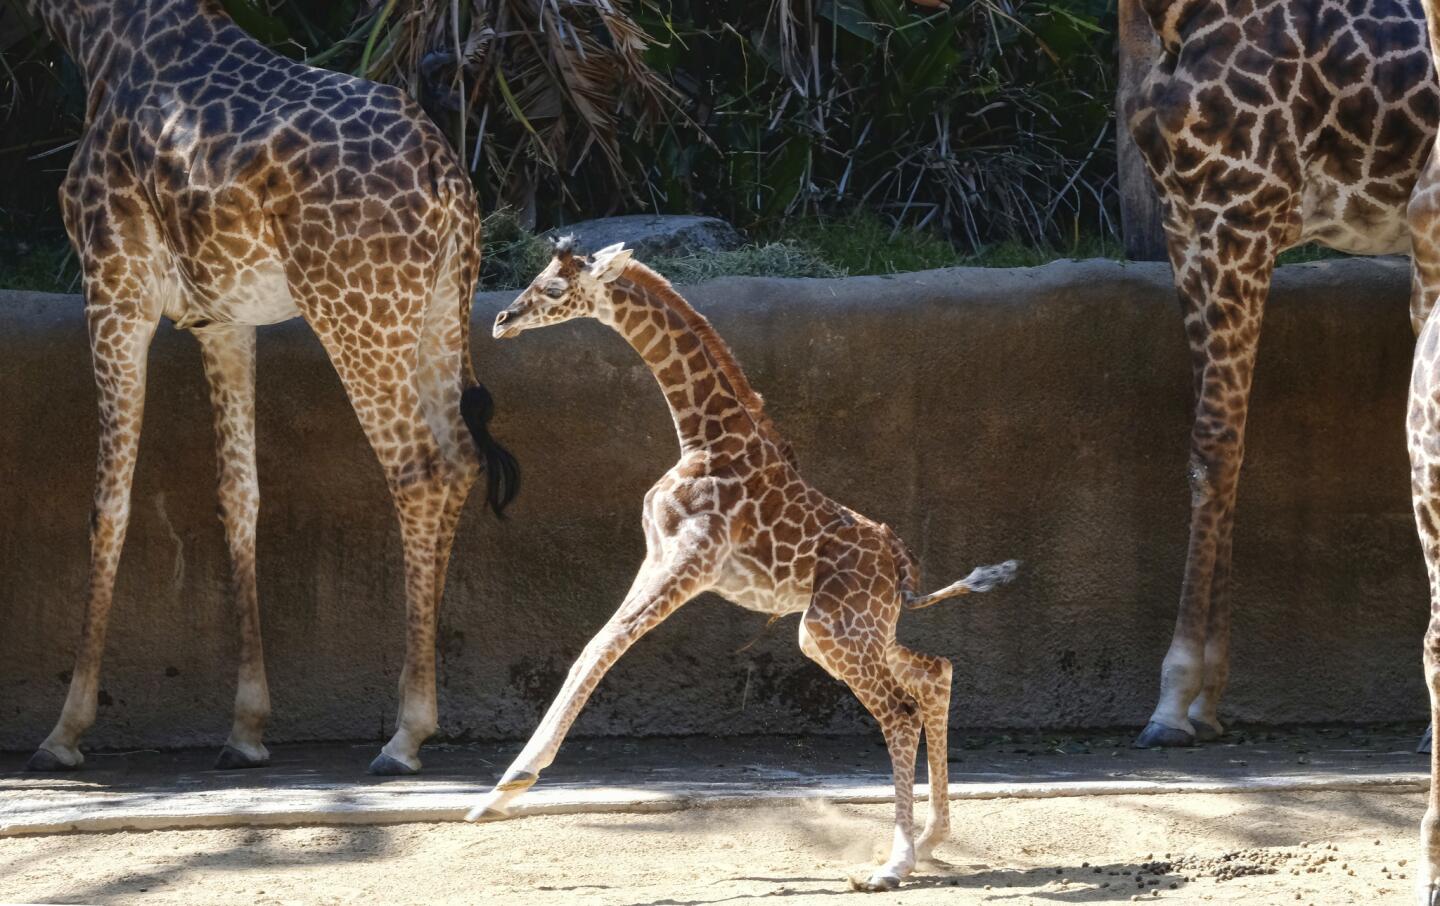 A female Masai baby giraffe born frolics in her enclosure during her public debut at the Los Angeles Zoo on July 26, 2017. Still without a name, the giraffe already stands about six feet tall and weighs 156 pounds.